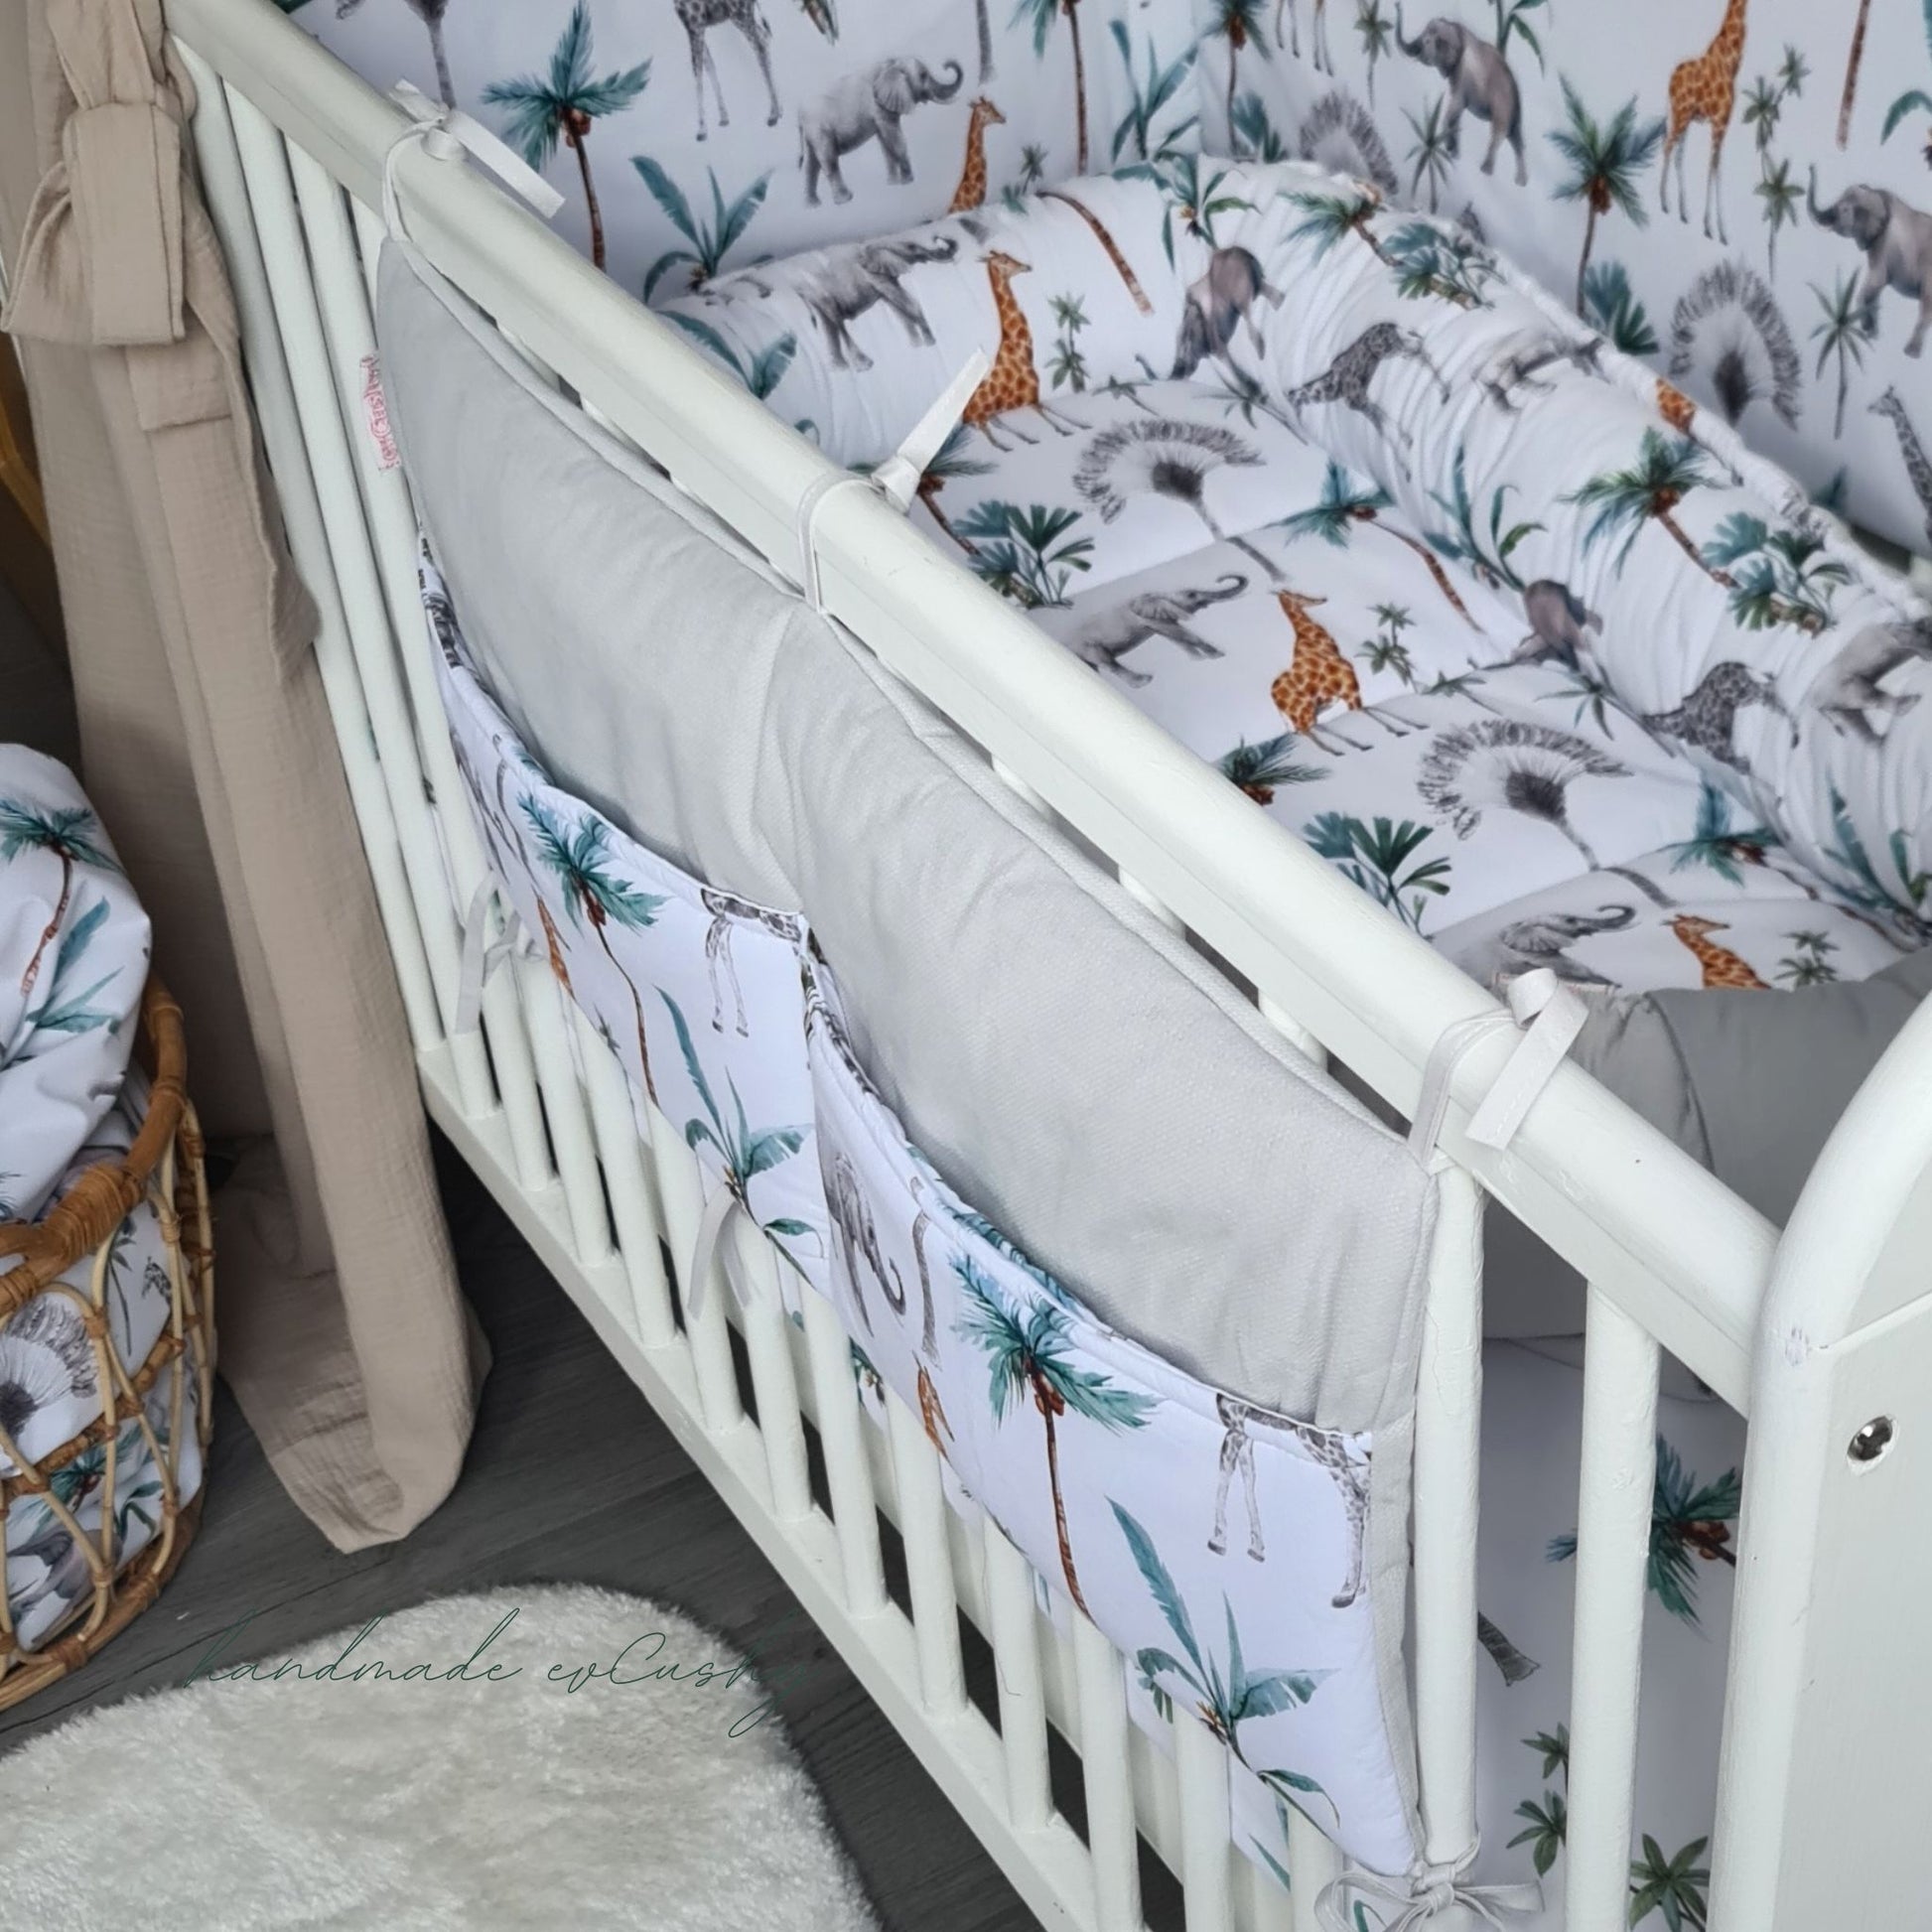 "Image: Safari Collection Cot Organizer – a versatile and stylish nursery accessory that attaches to cot bars, offering convenient storage for baby essentials. white grey and green"